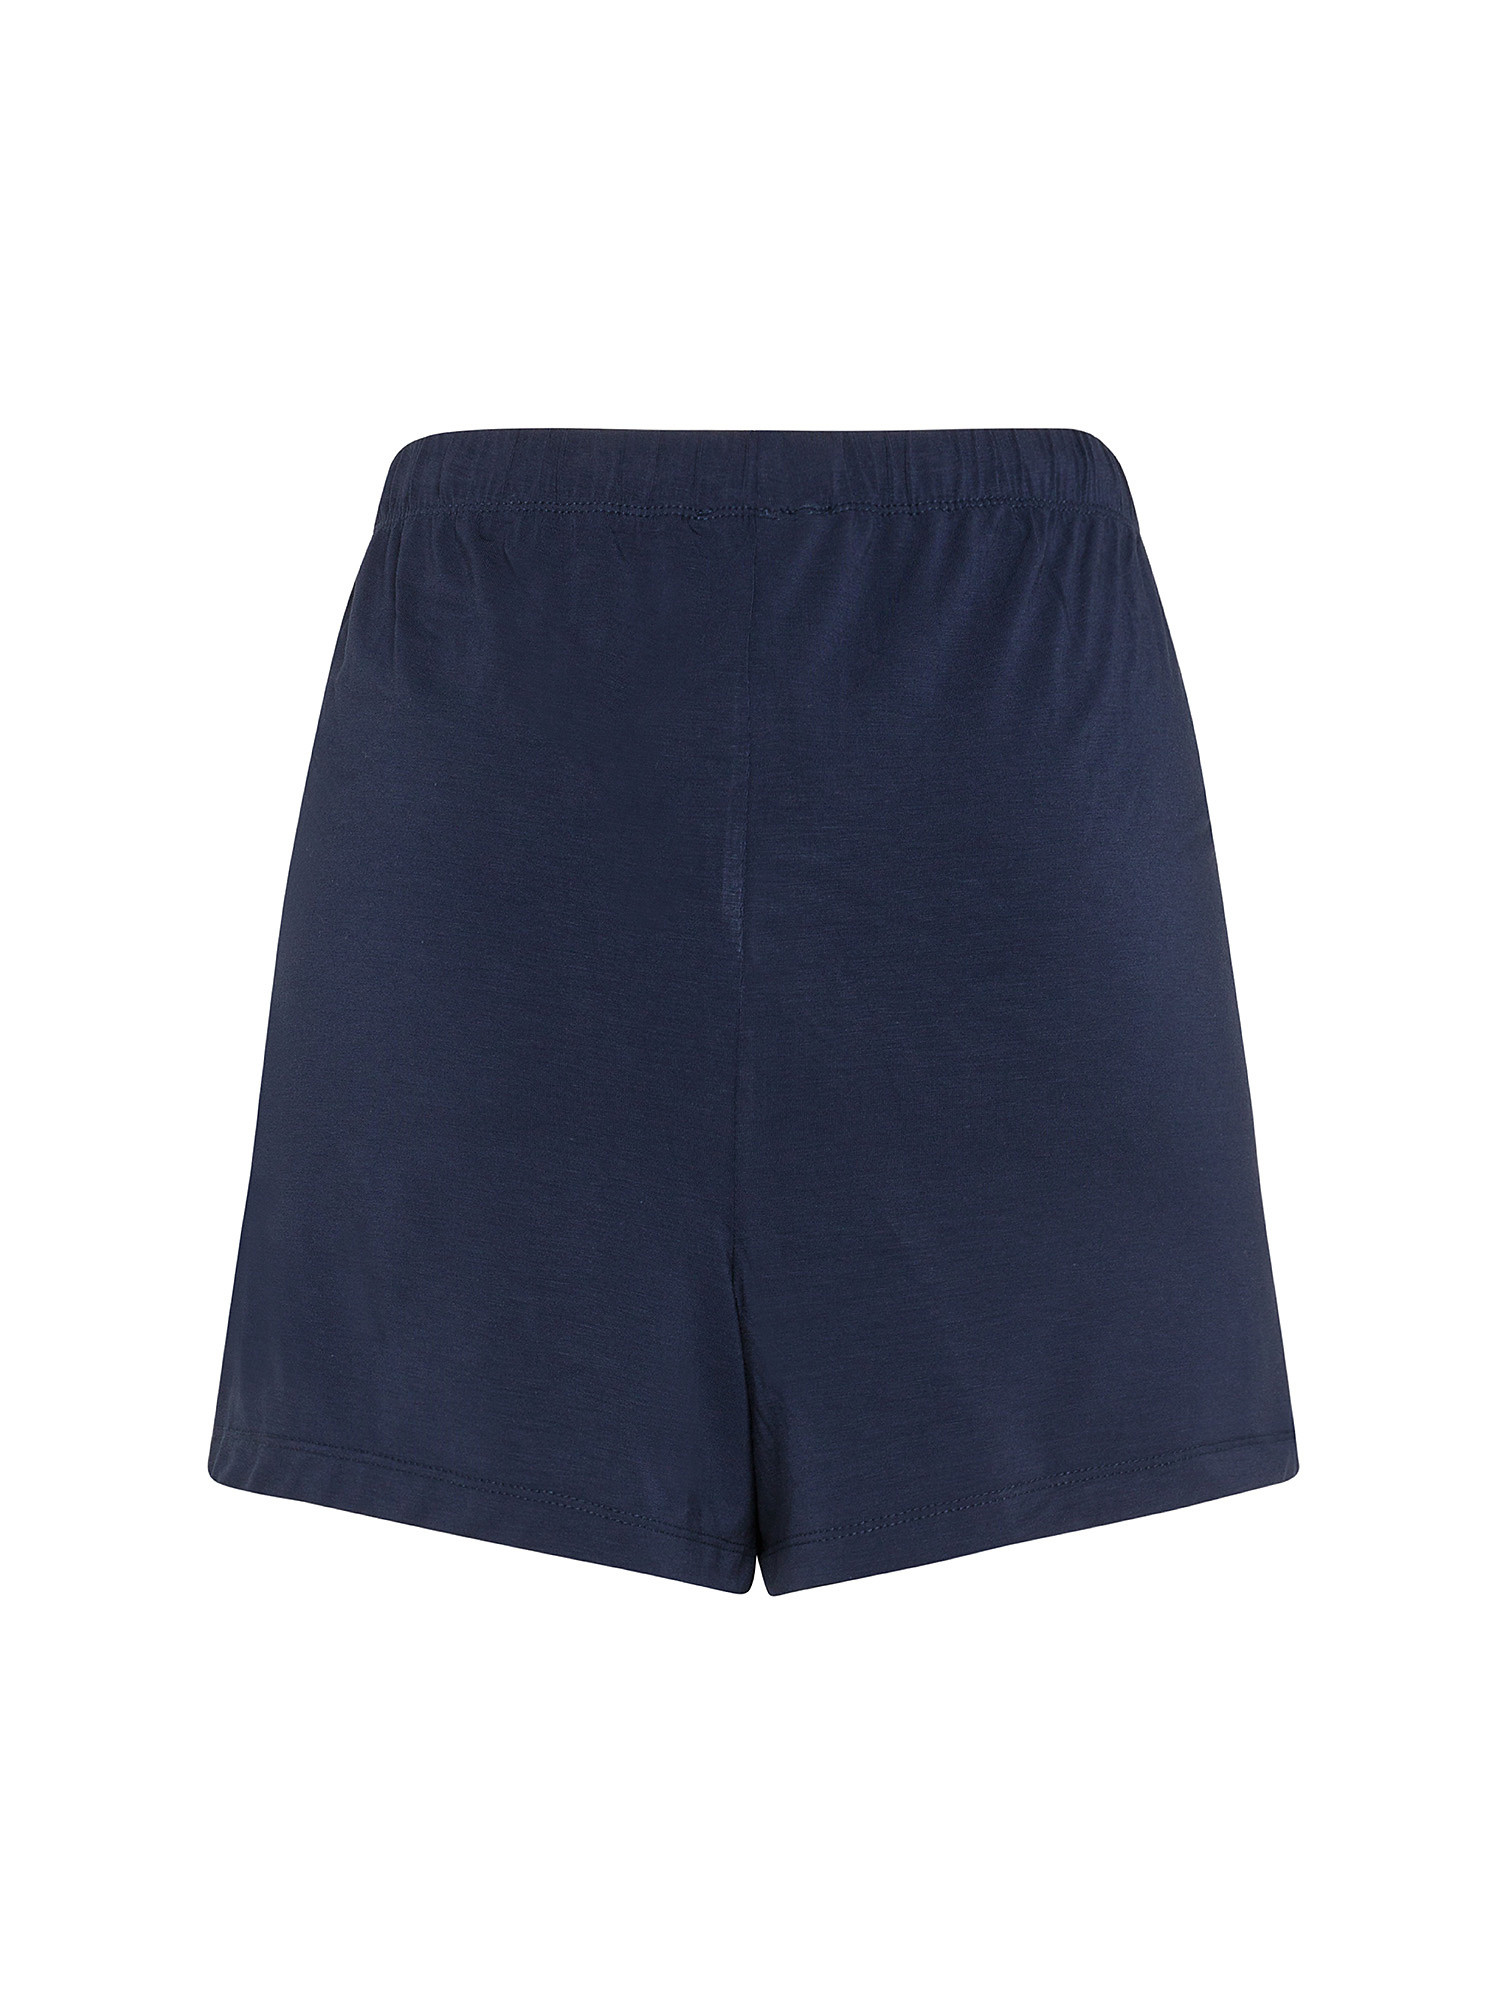 Solid color bamboo viscose shorts, Blue, large image number 1